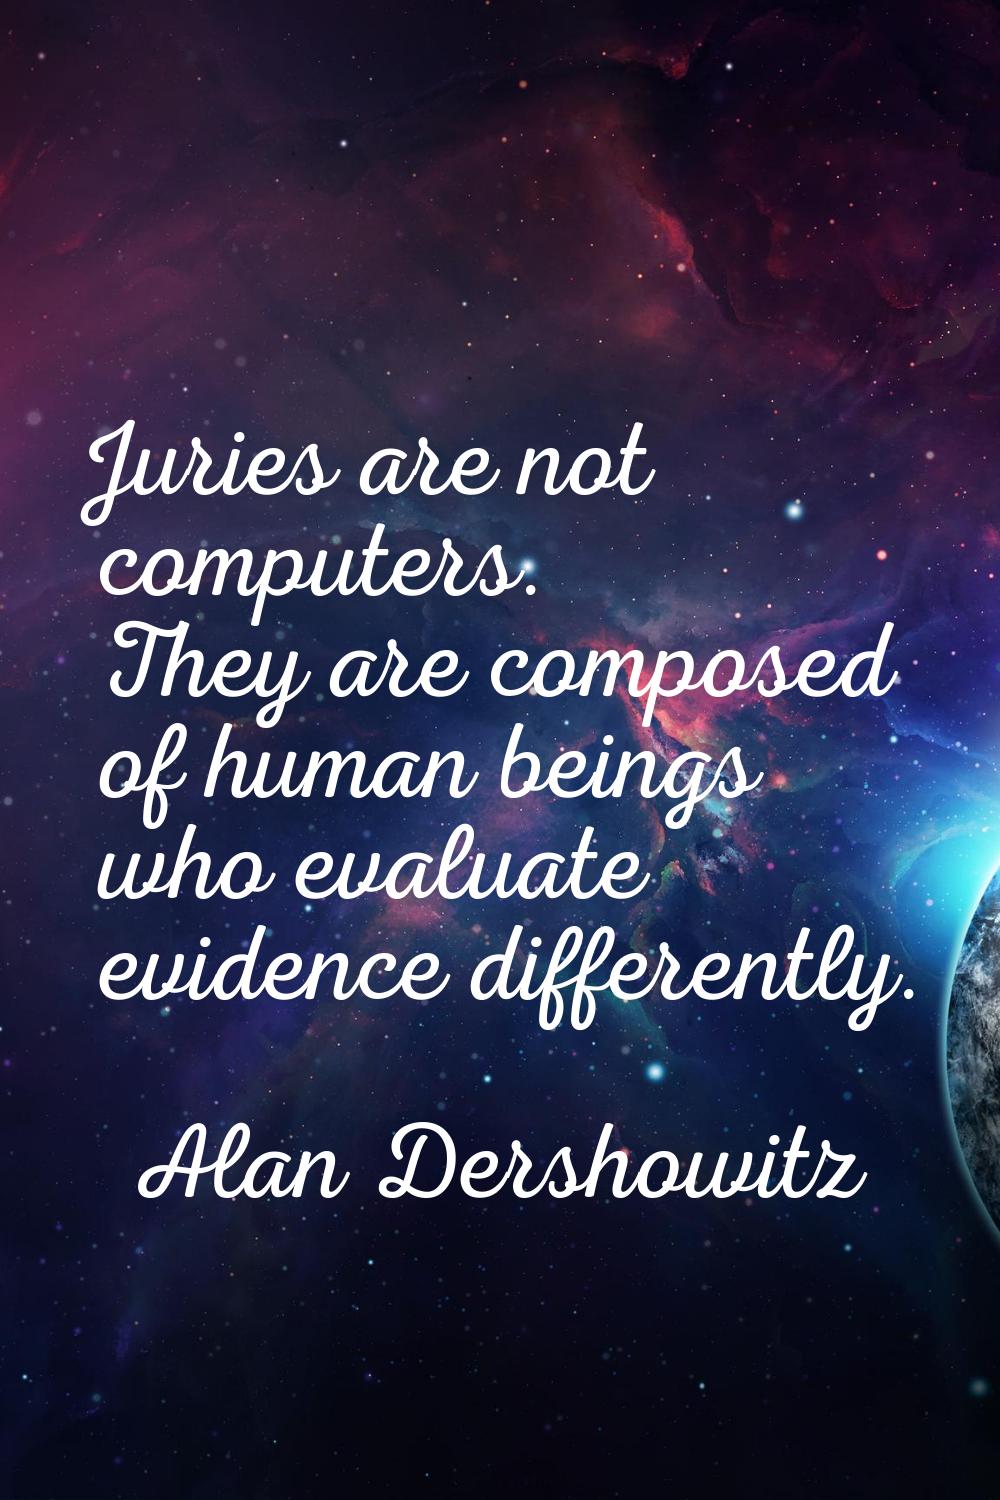 Juries are not computers. They are composed of human beings who evaluate evidence differently.